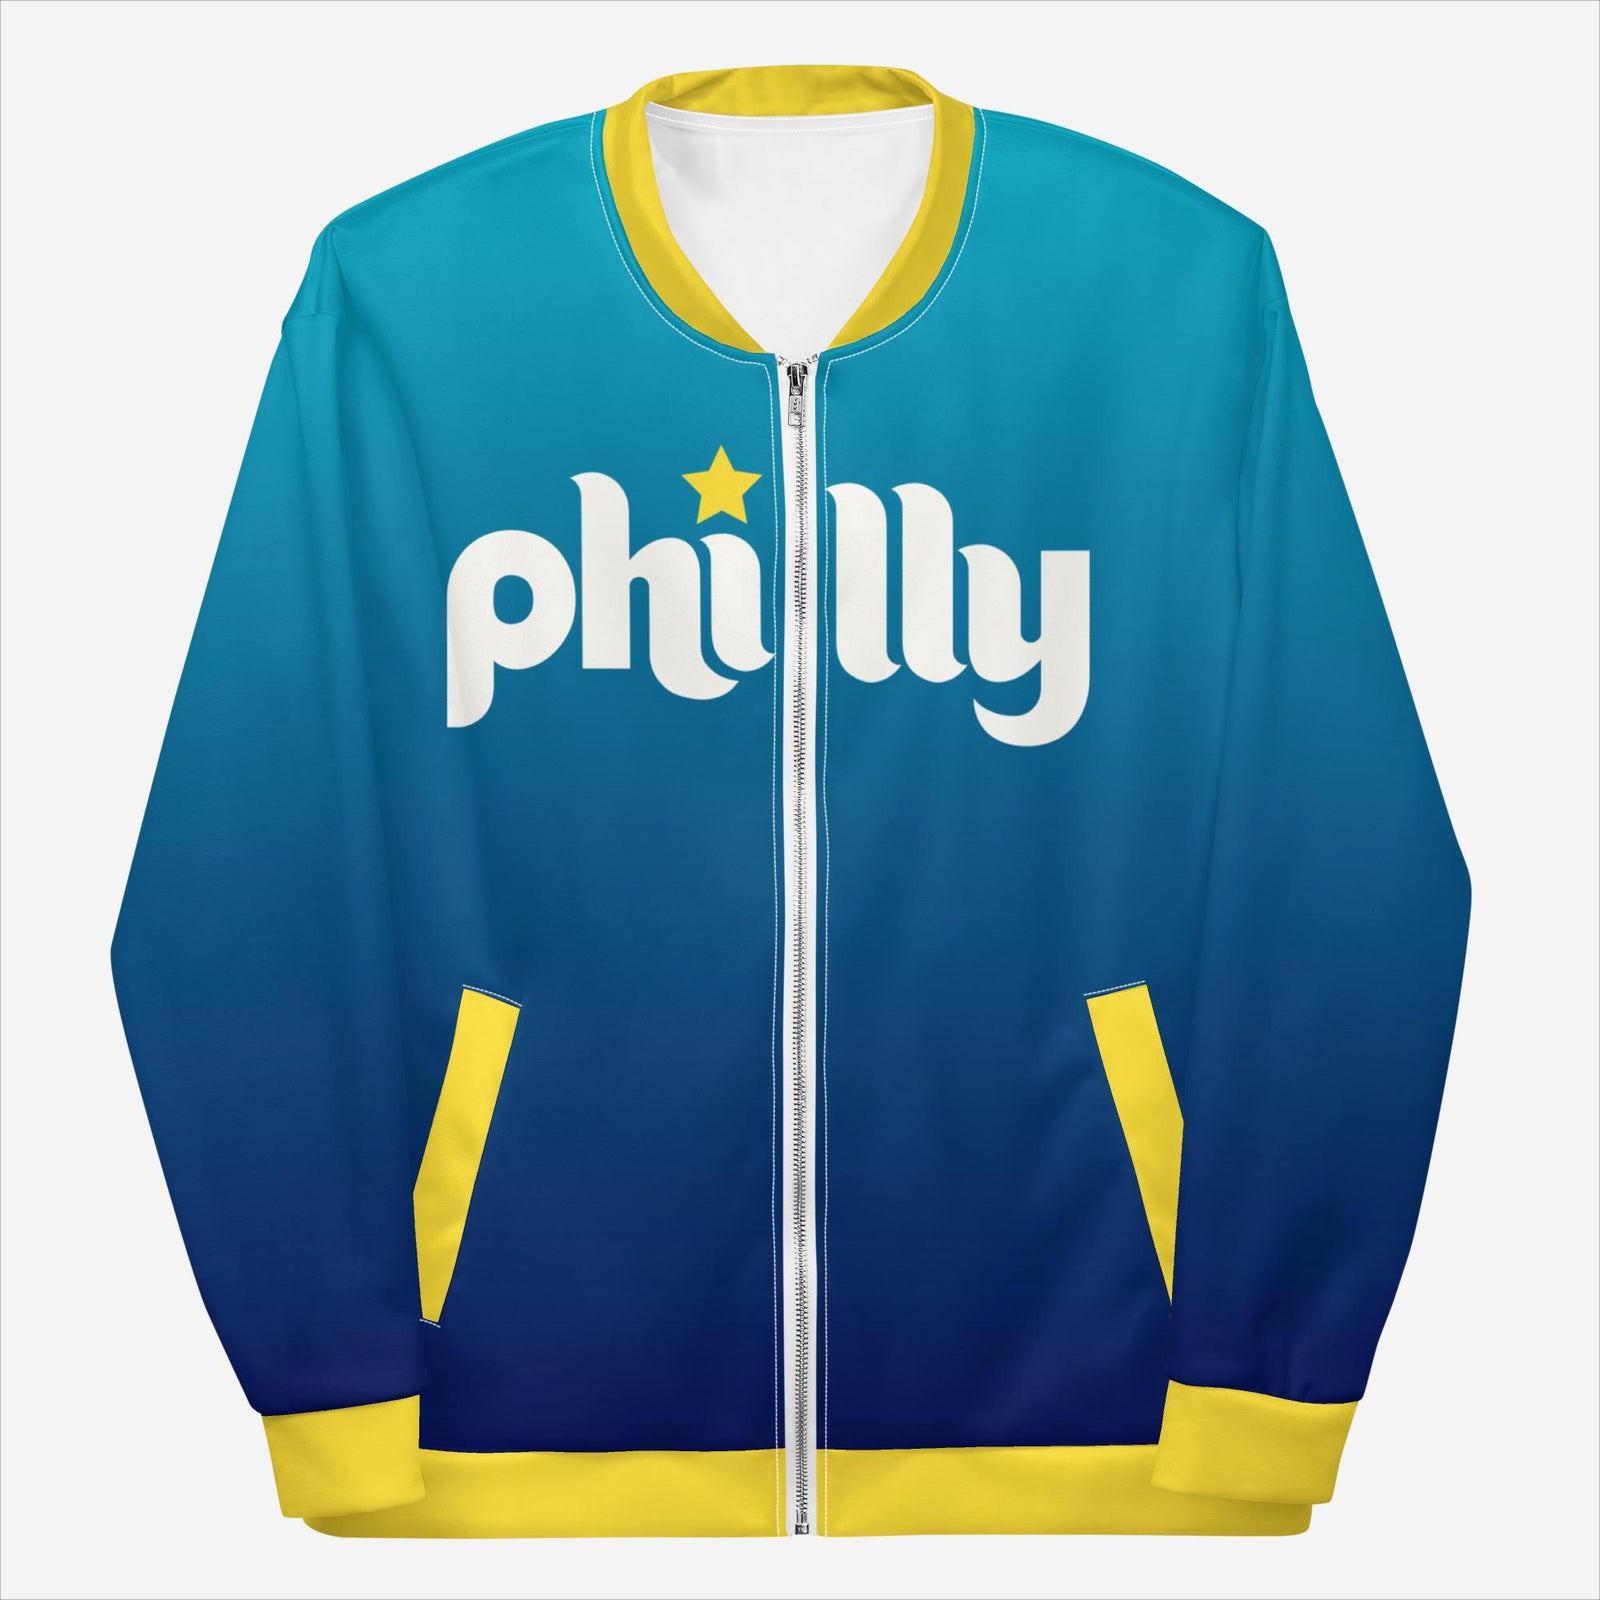 "Philly Connect" Premium Track Jacket